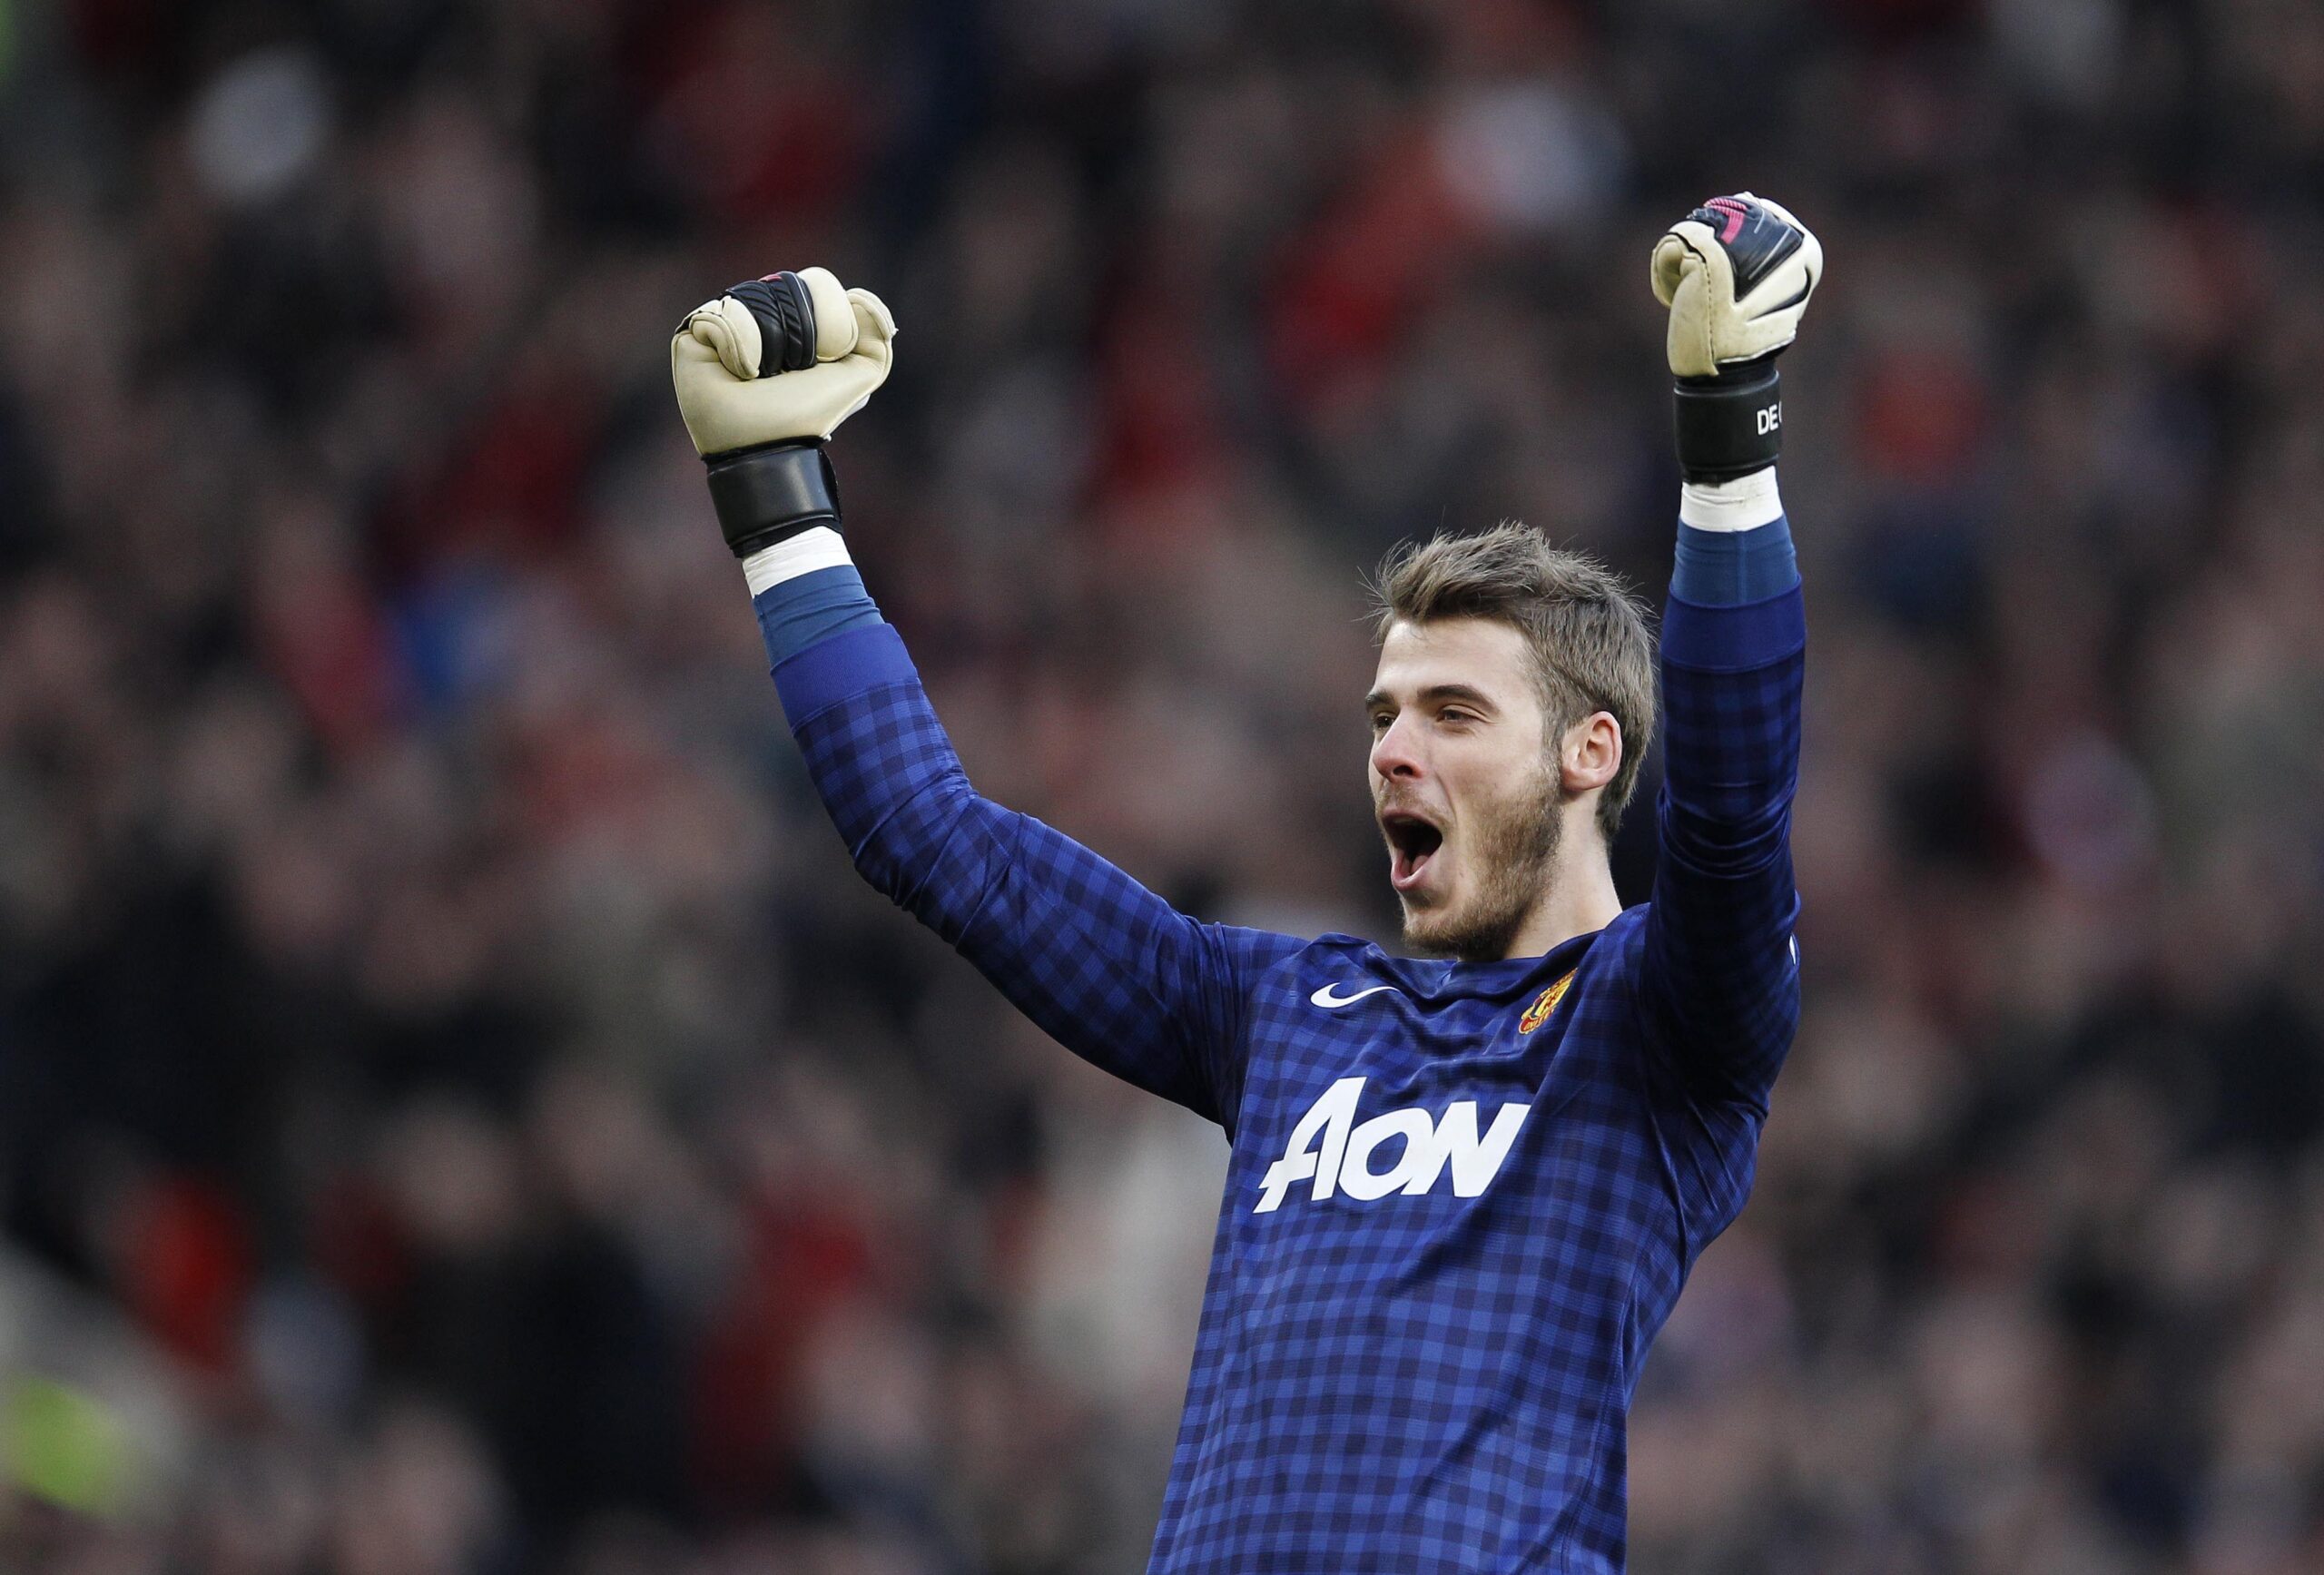 Manchester United David De Gea after the game wallpapers and